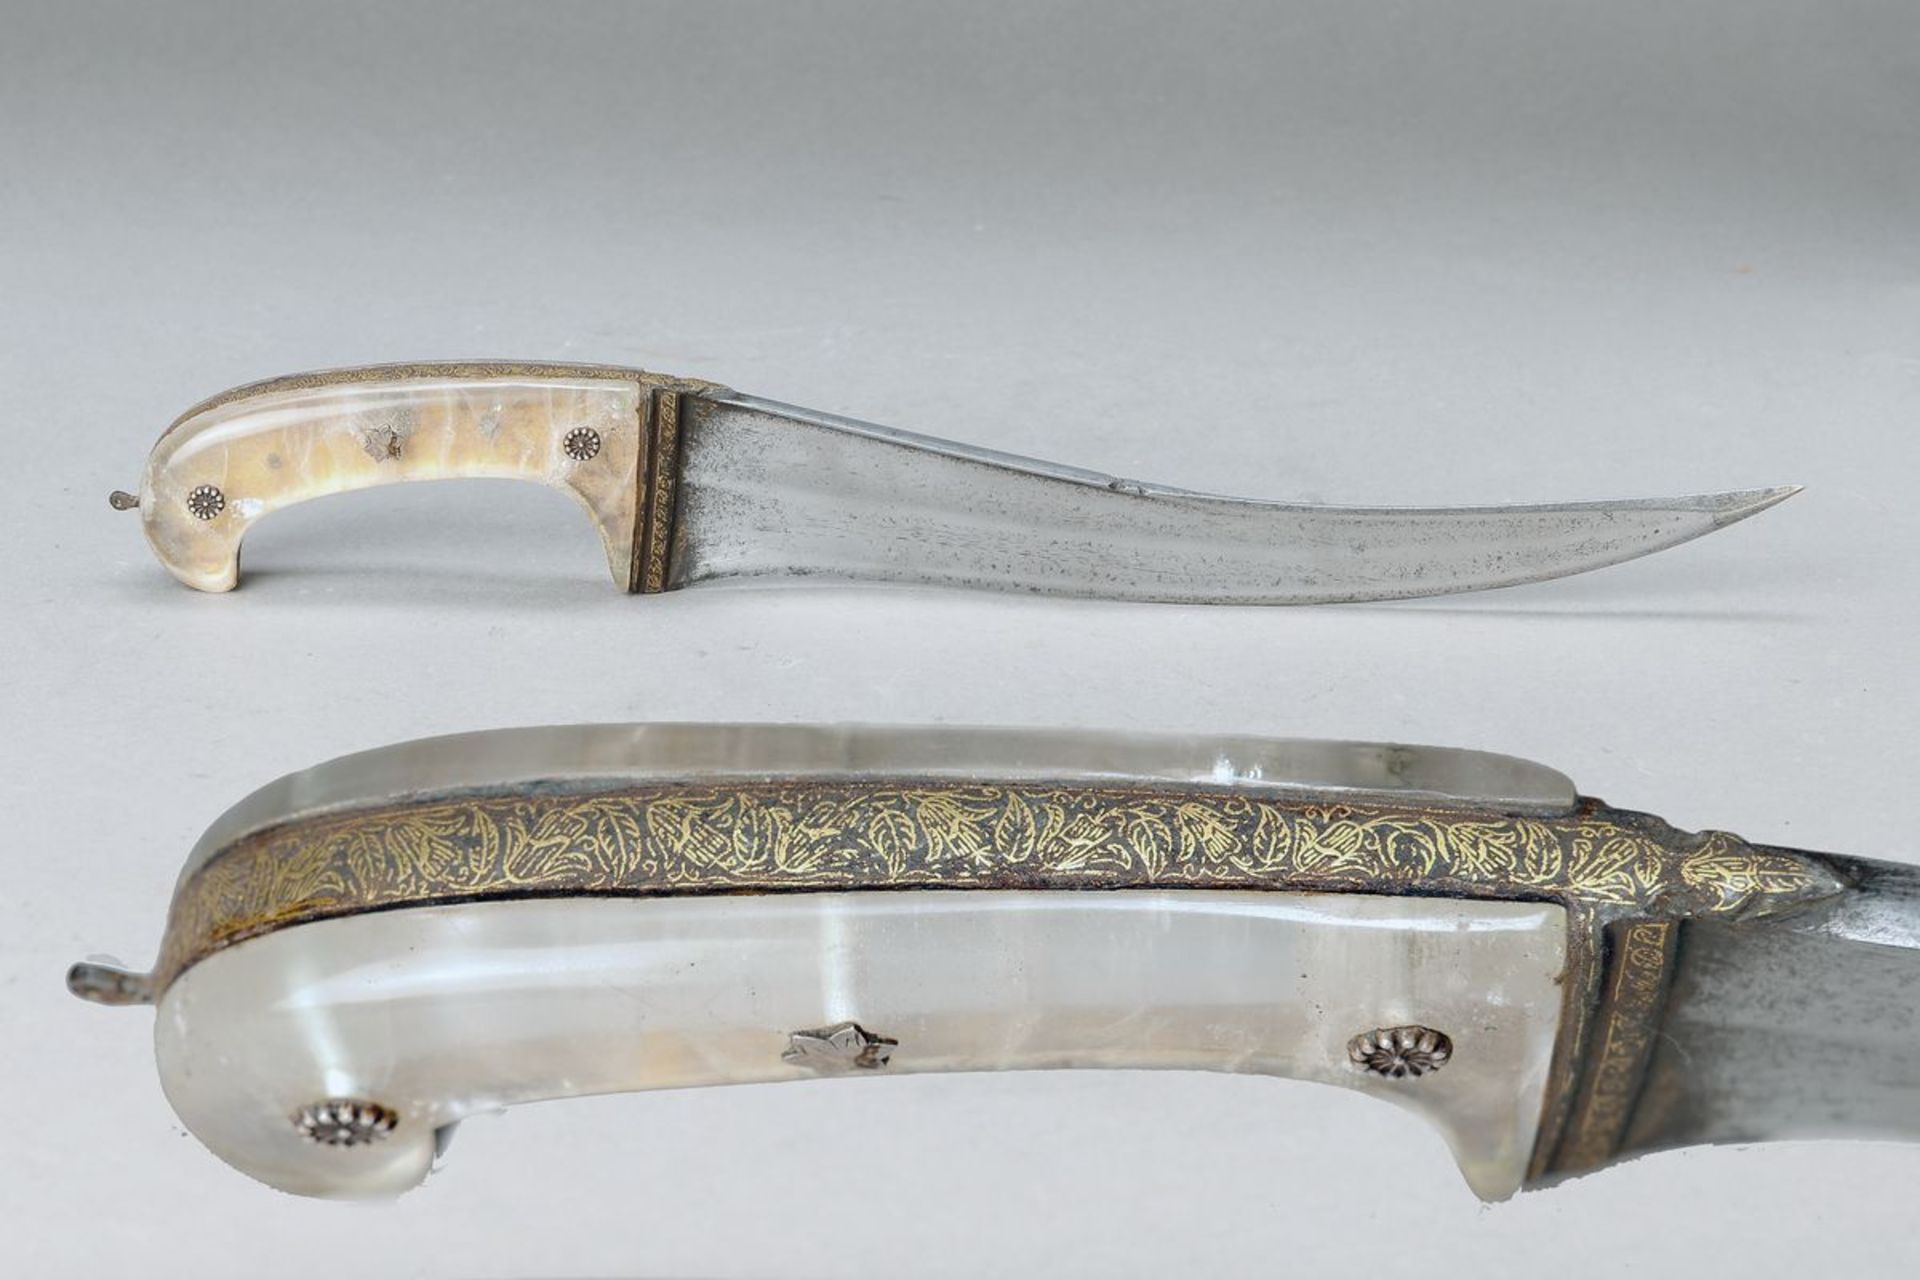 Dagger, India, 18.th c., rock crystal handle, iron sheath with gold damascene, very fine floral